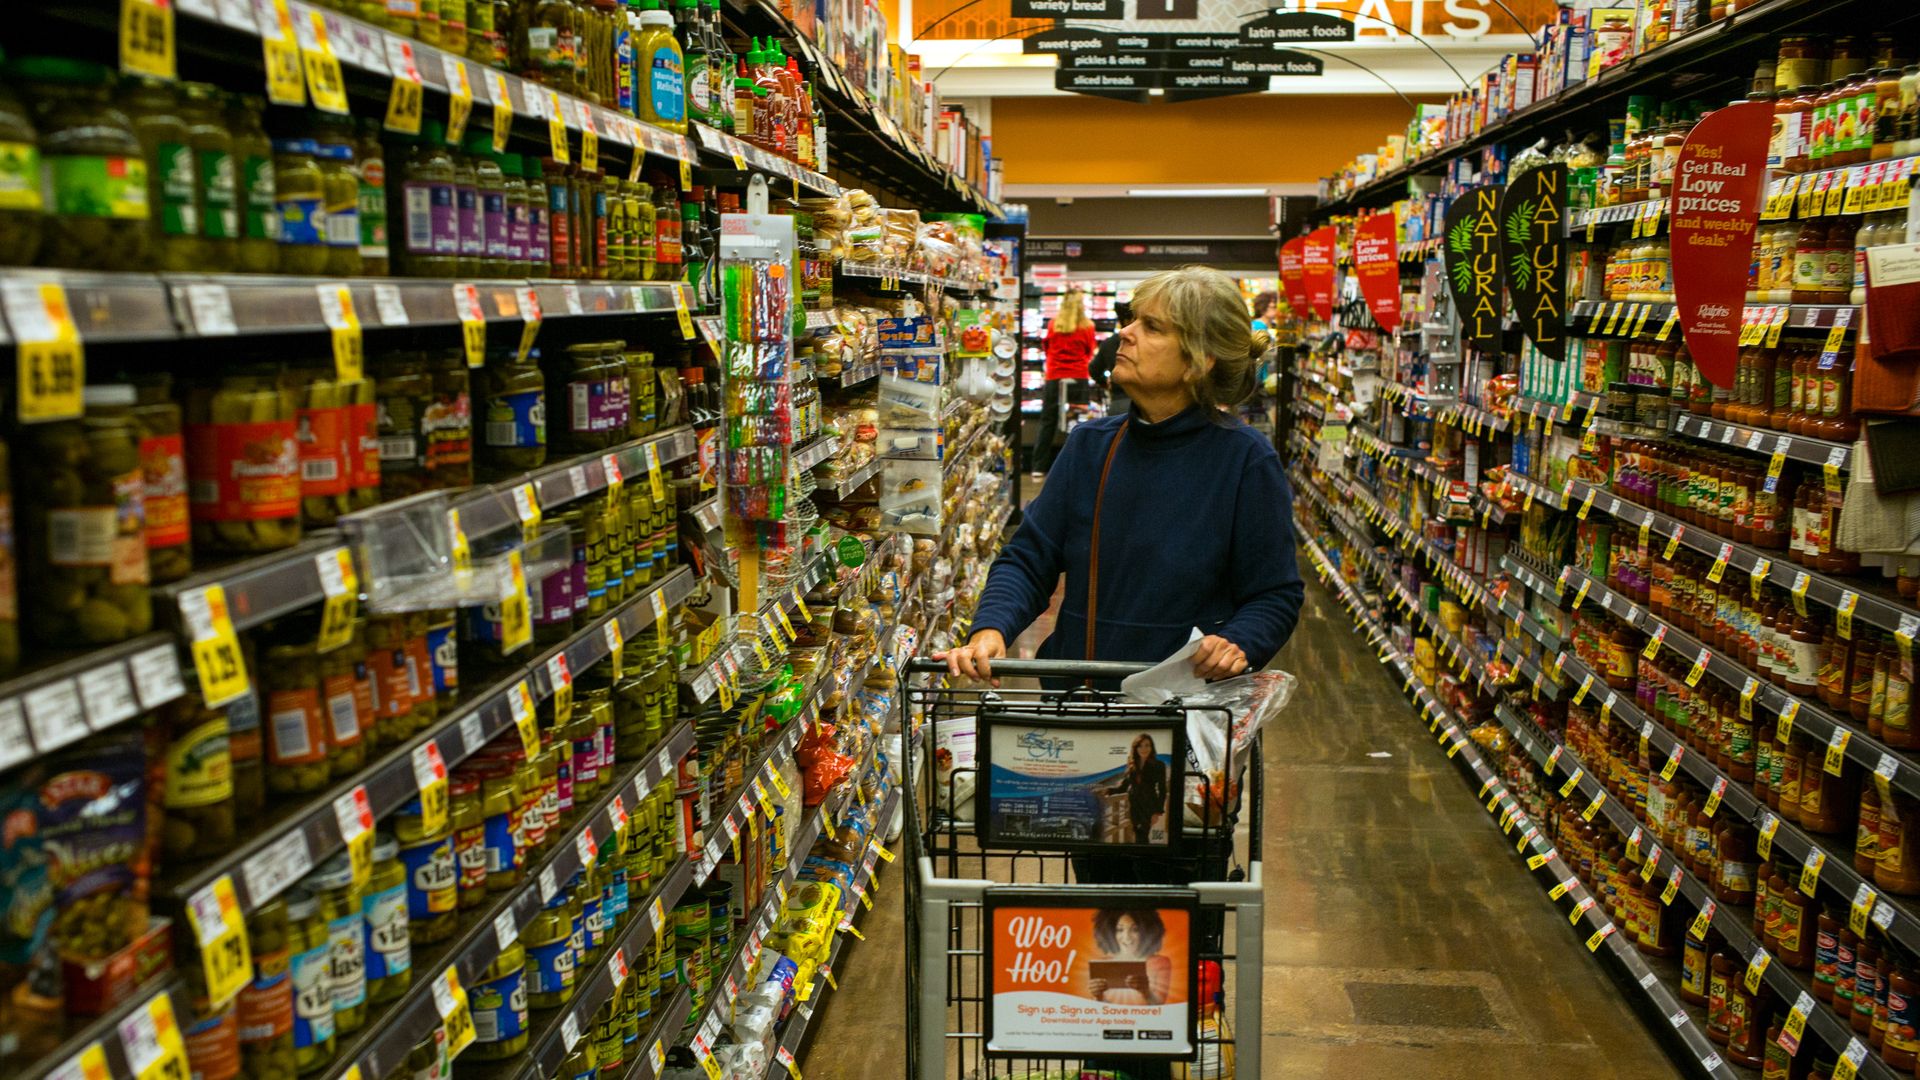 A woman browses products in an aisle